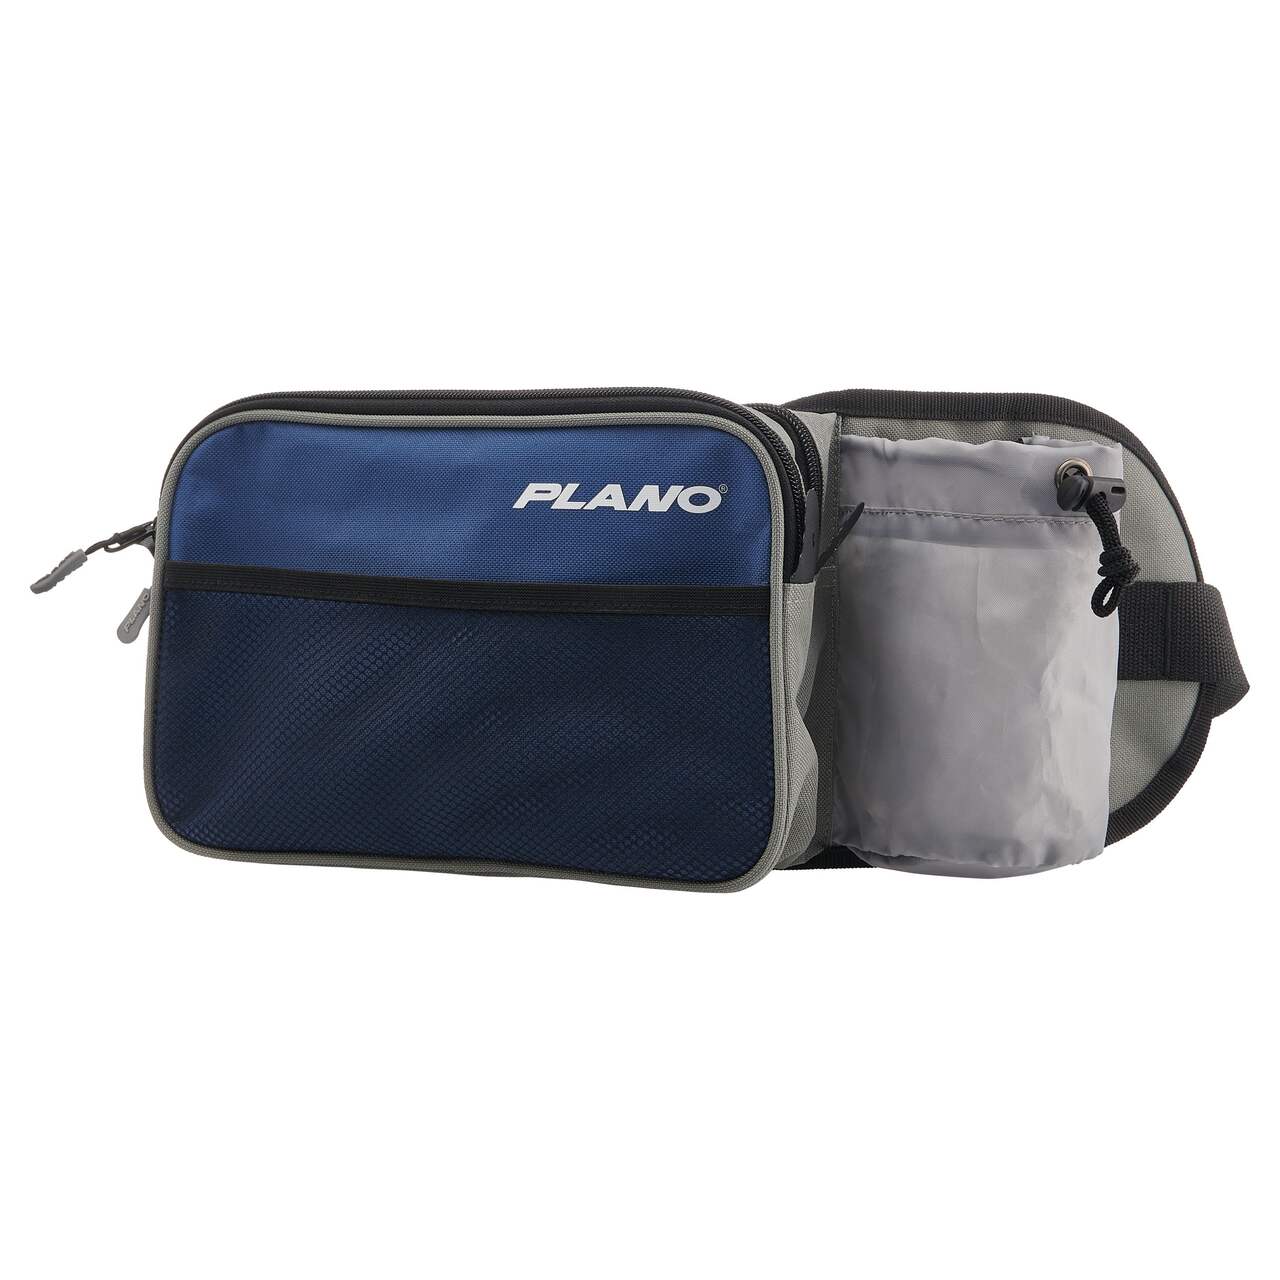 Plano Fishing Tackle Waist Pack, Blue